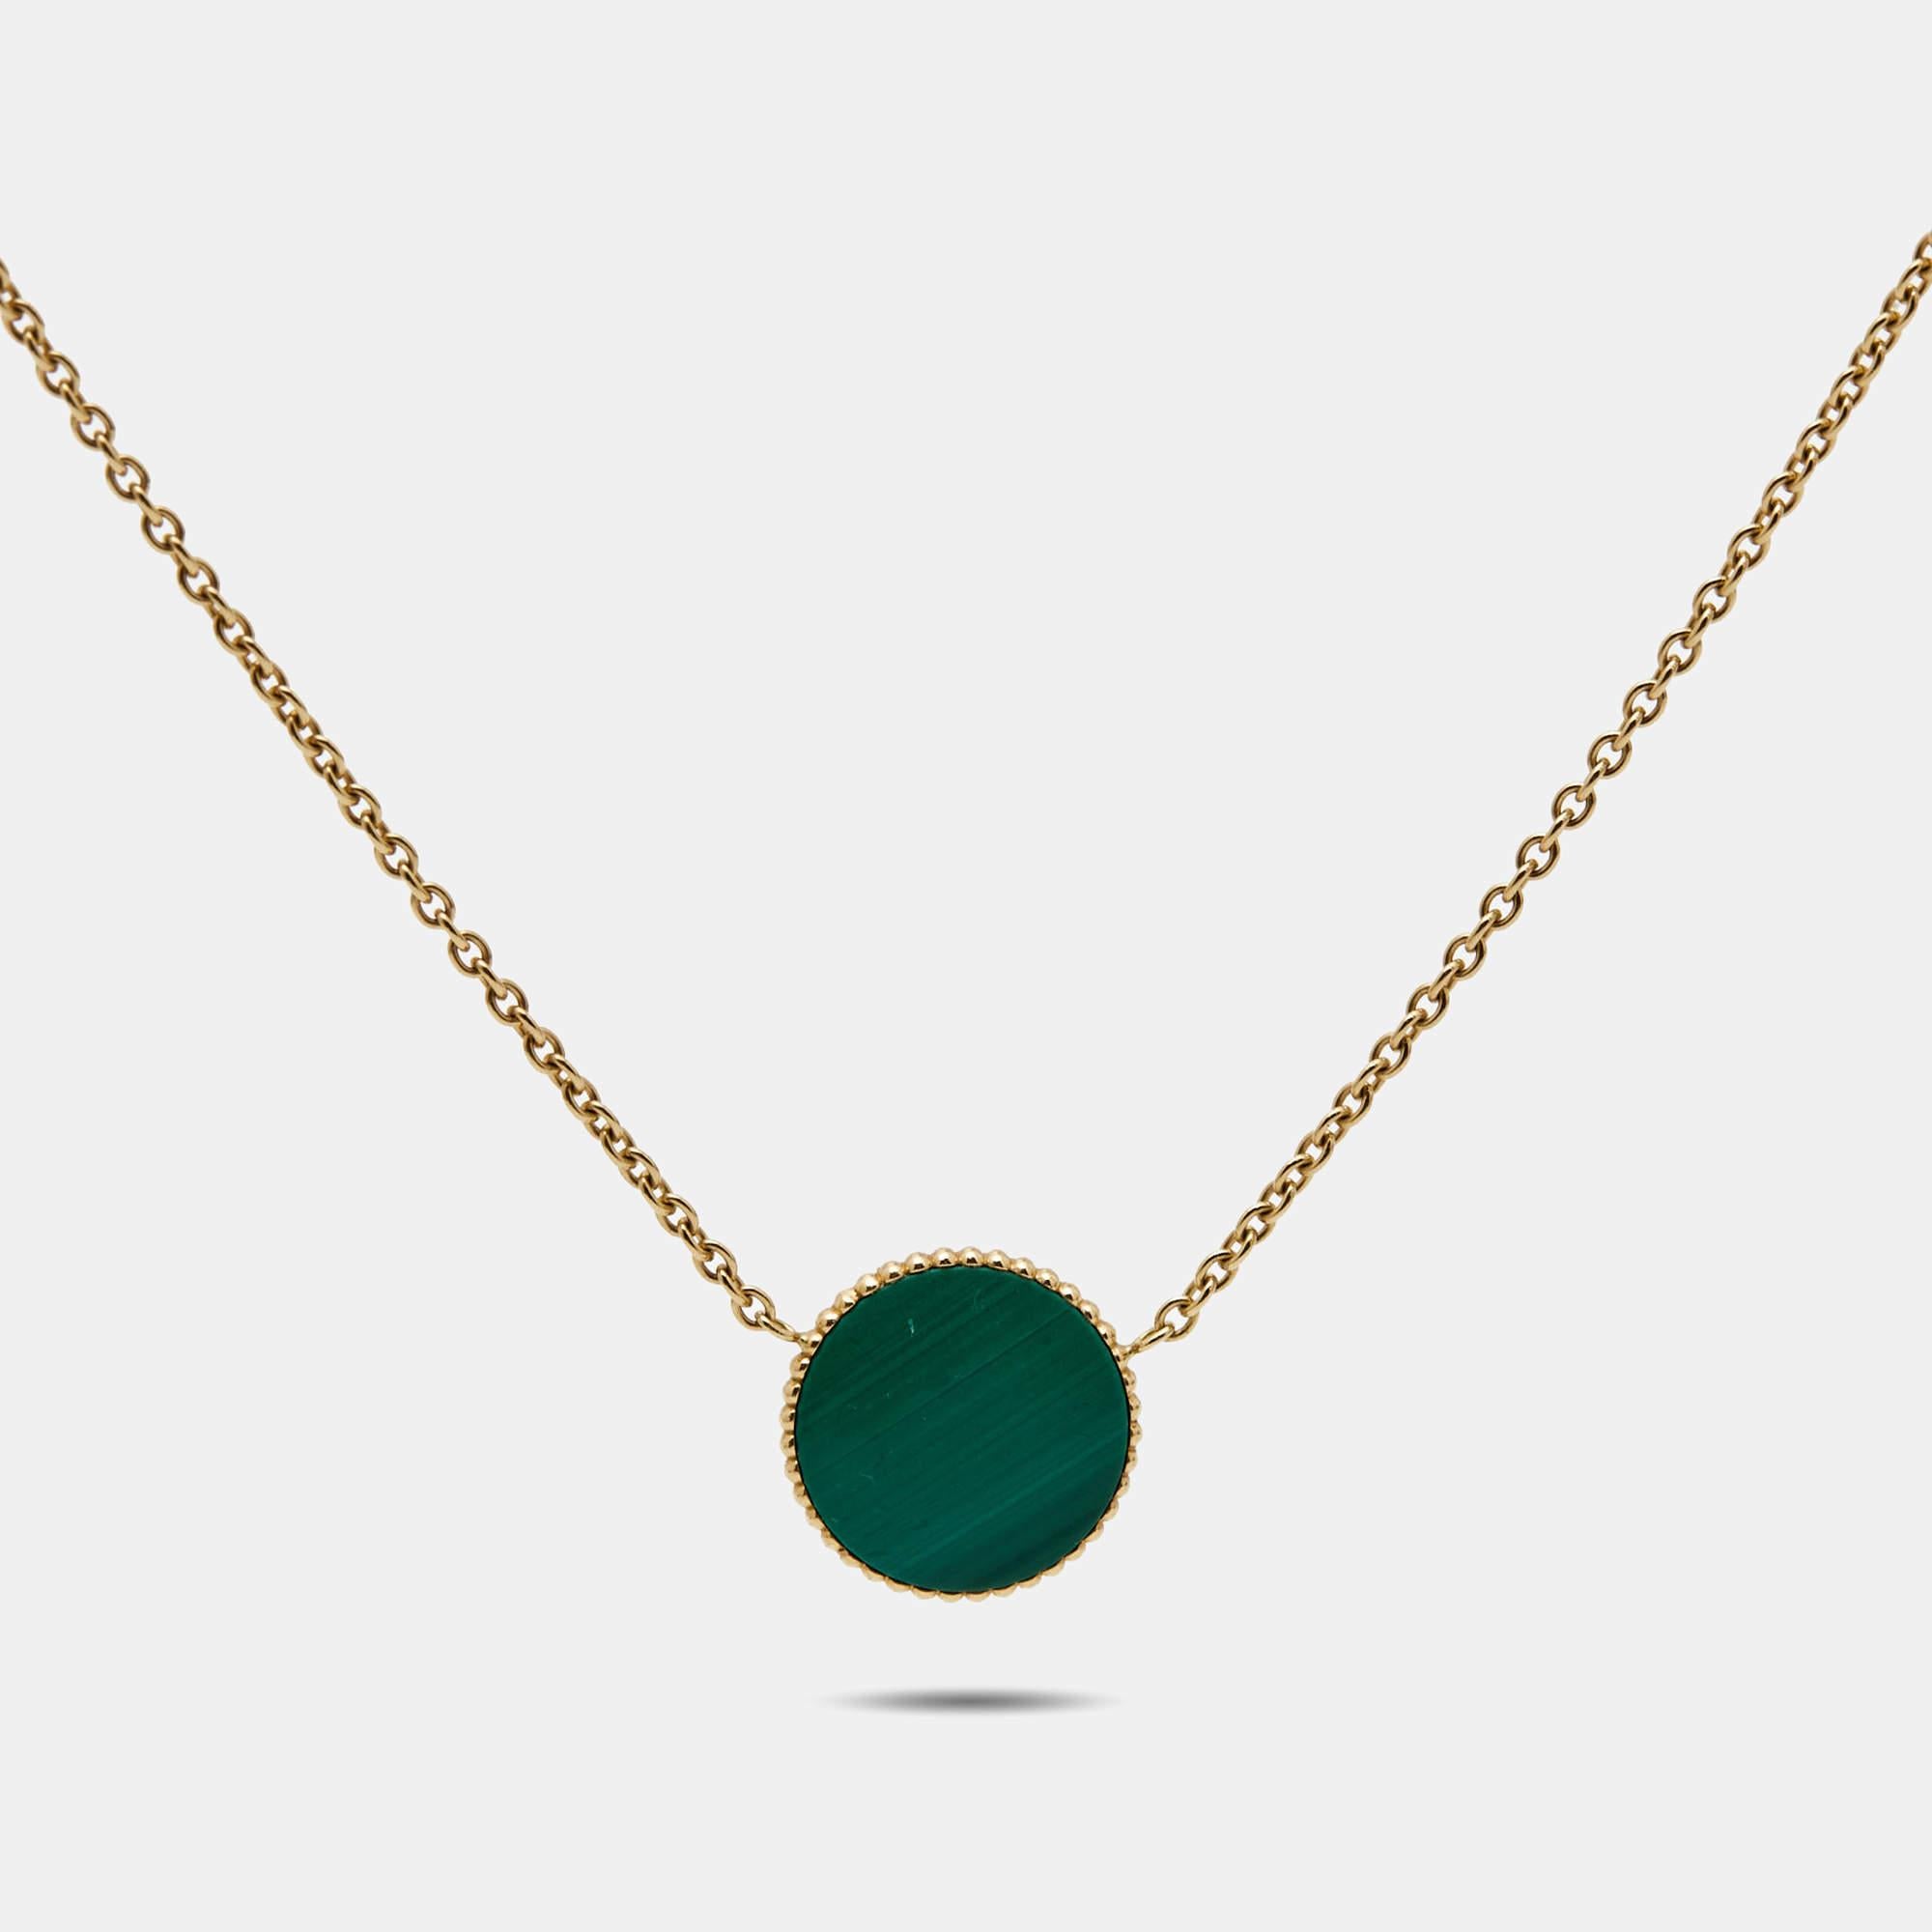 This Rose des Vents necklace by Dior exhibits the talisman star as its main highlight. The necklace's design features a round pendant inlaid with malachite and outlined with 18k yellow gold beaded borders. The motif is further accented with a gold